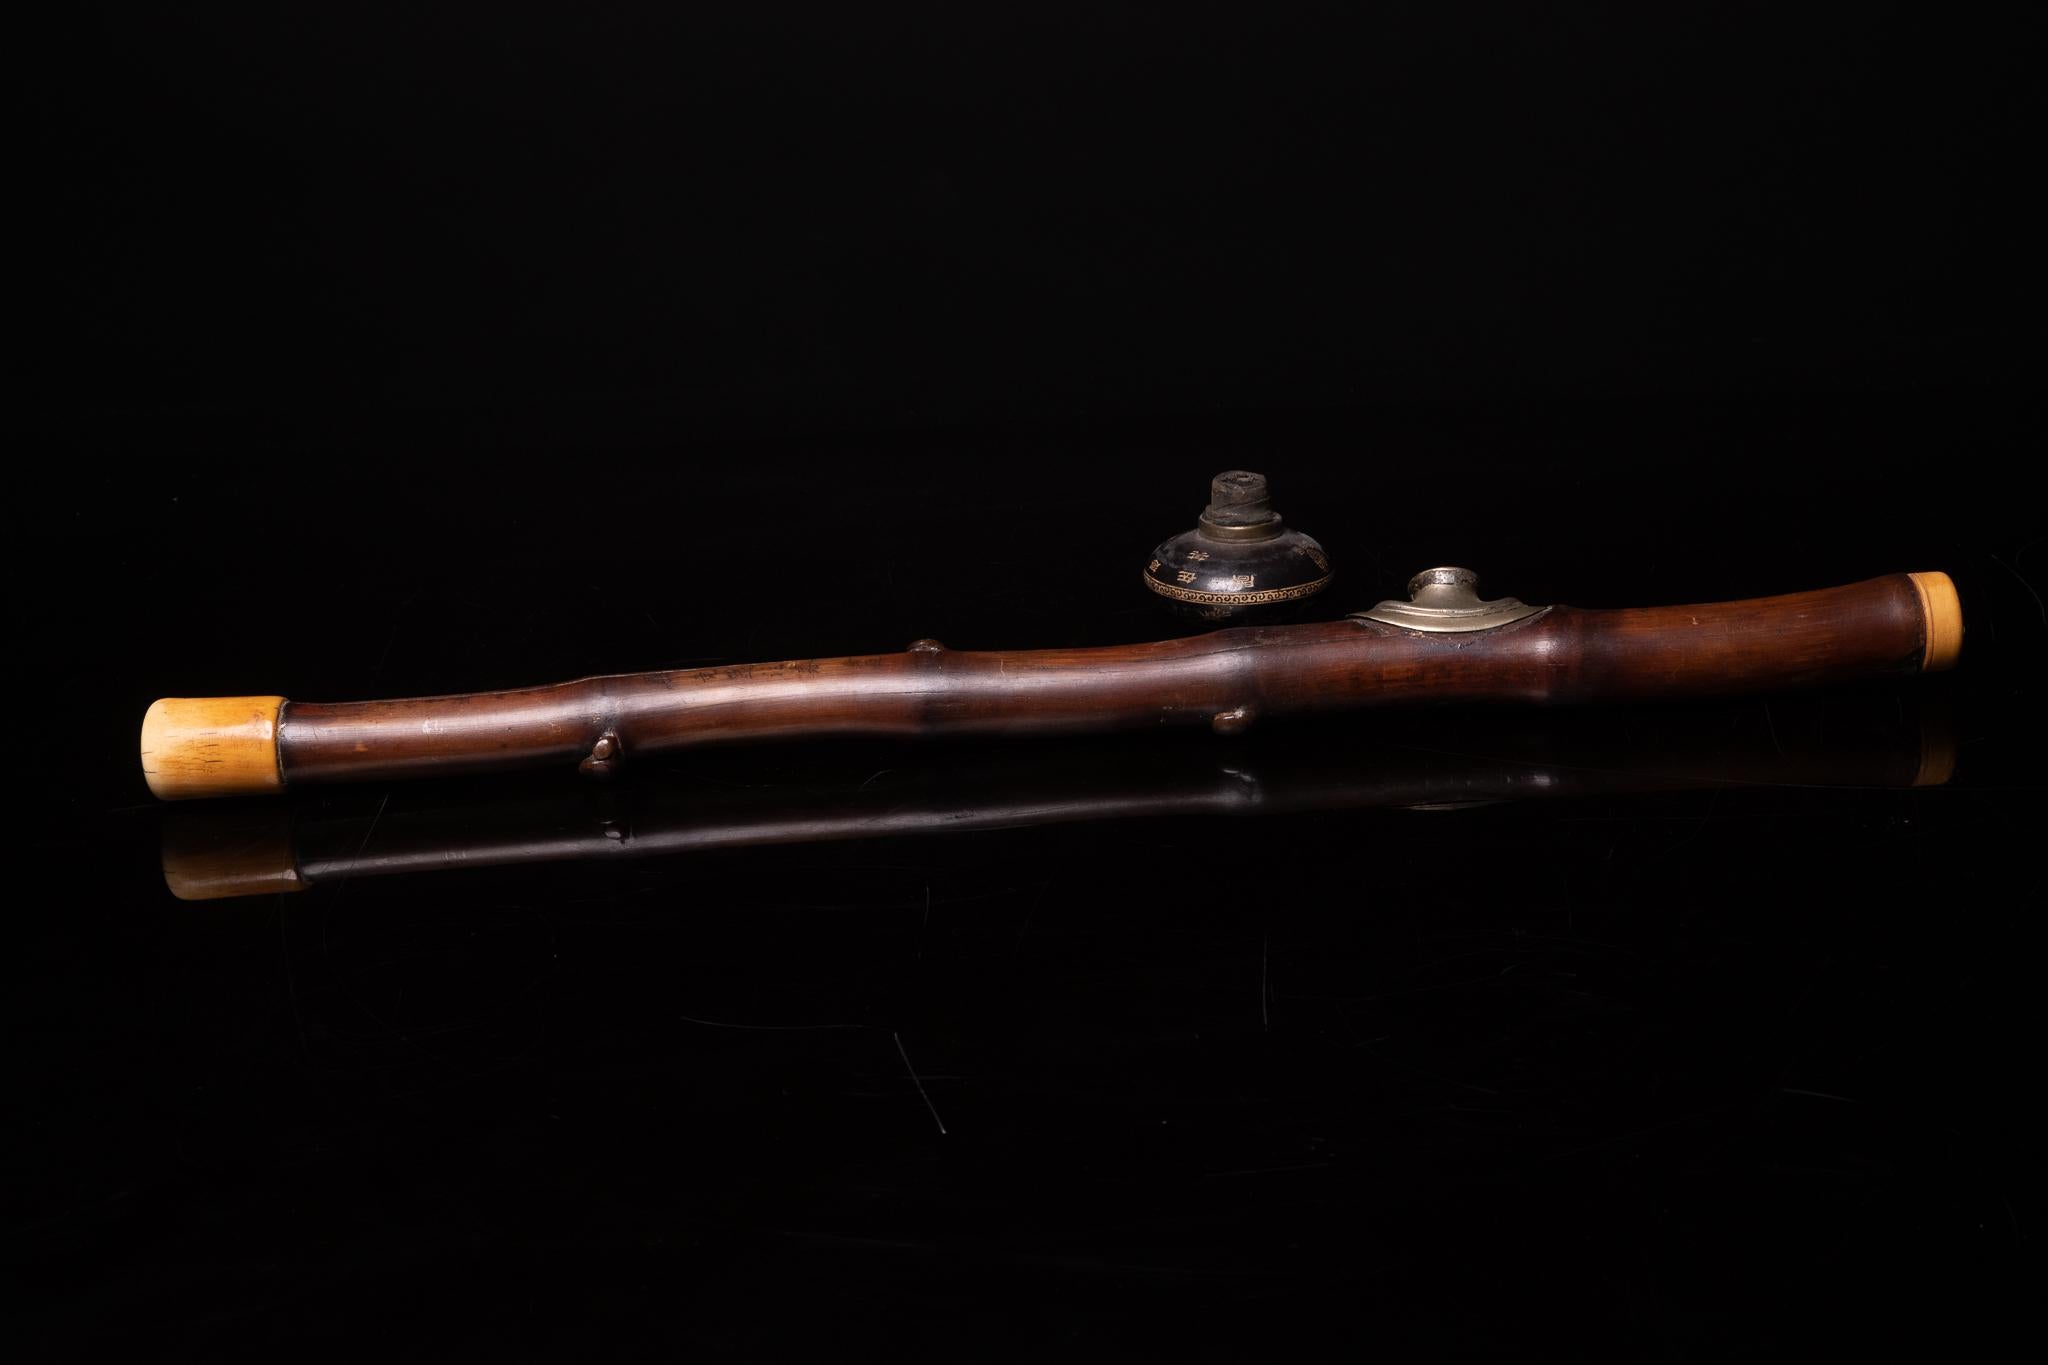 The opium pipe is used to vaporize and inhale opium. The pipe consists of a long stem of almost half a meter, a ceramic pipe bowl, and a metal fitting (“saddle”), through which the pipe bowl plugs into the pipe stem. The pipe is heated over a unique